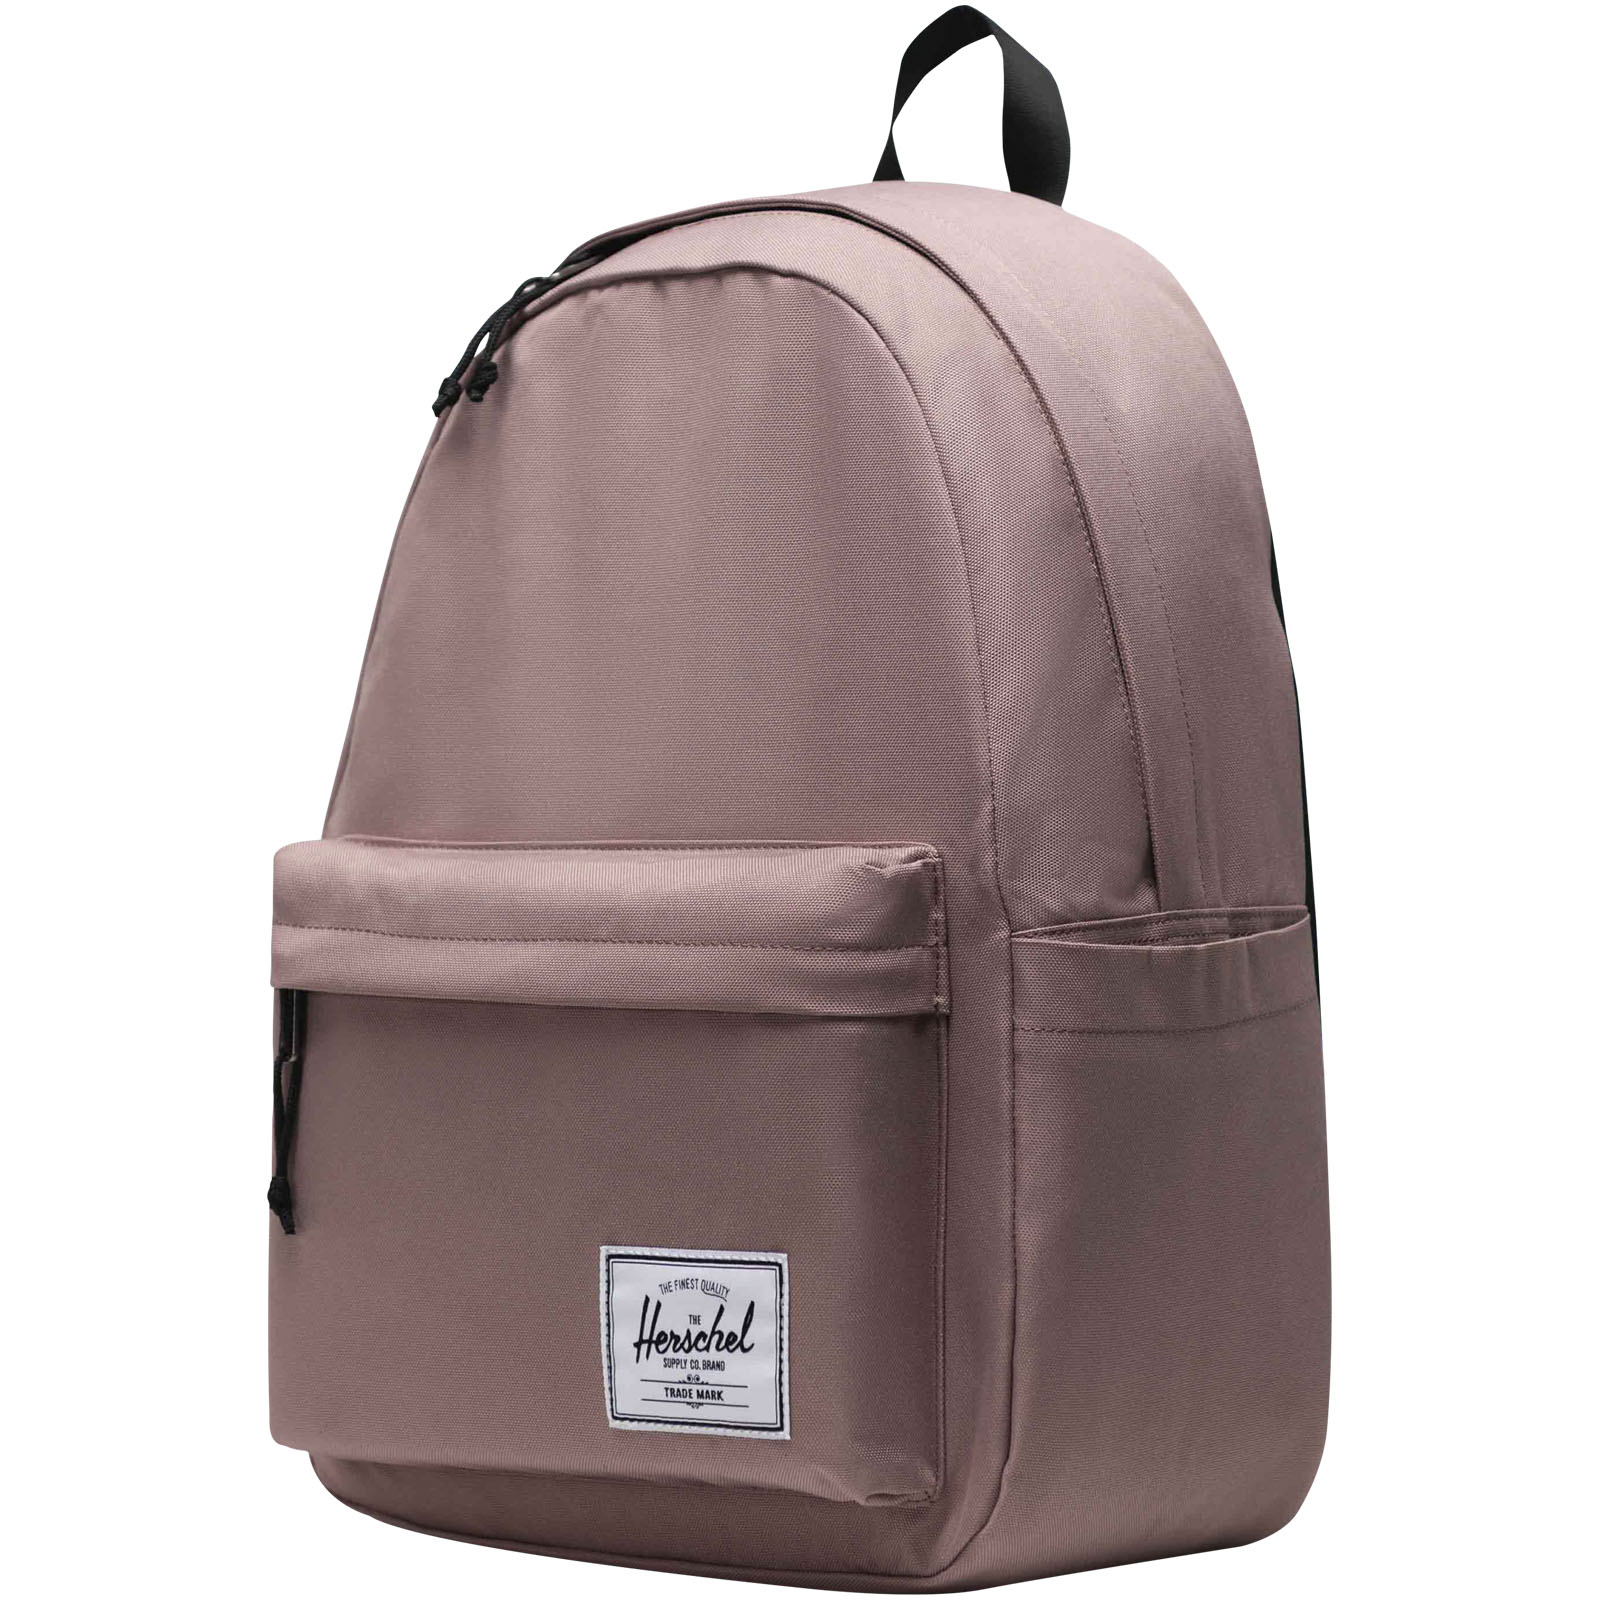 Advertising Backpacks - Herschel Classic™ recycled laptop backpack 26L